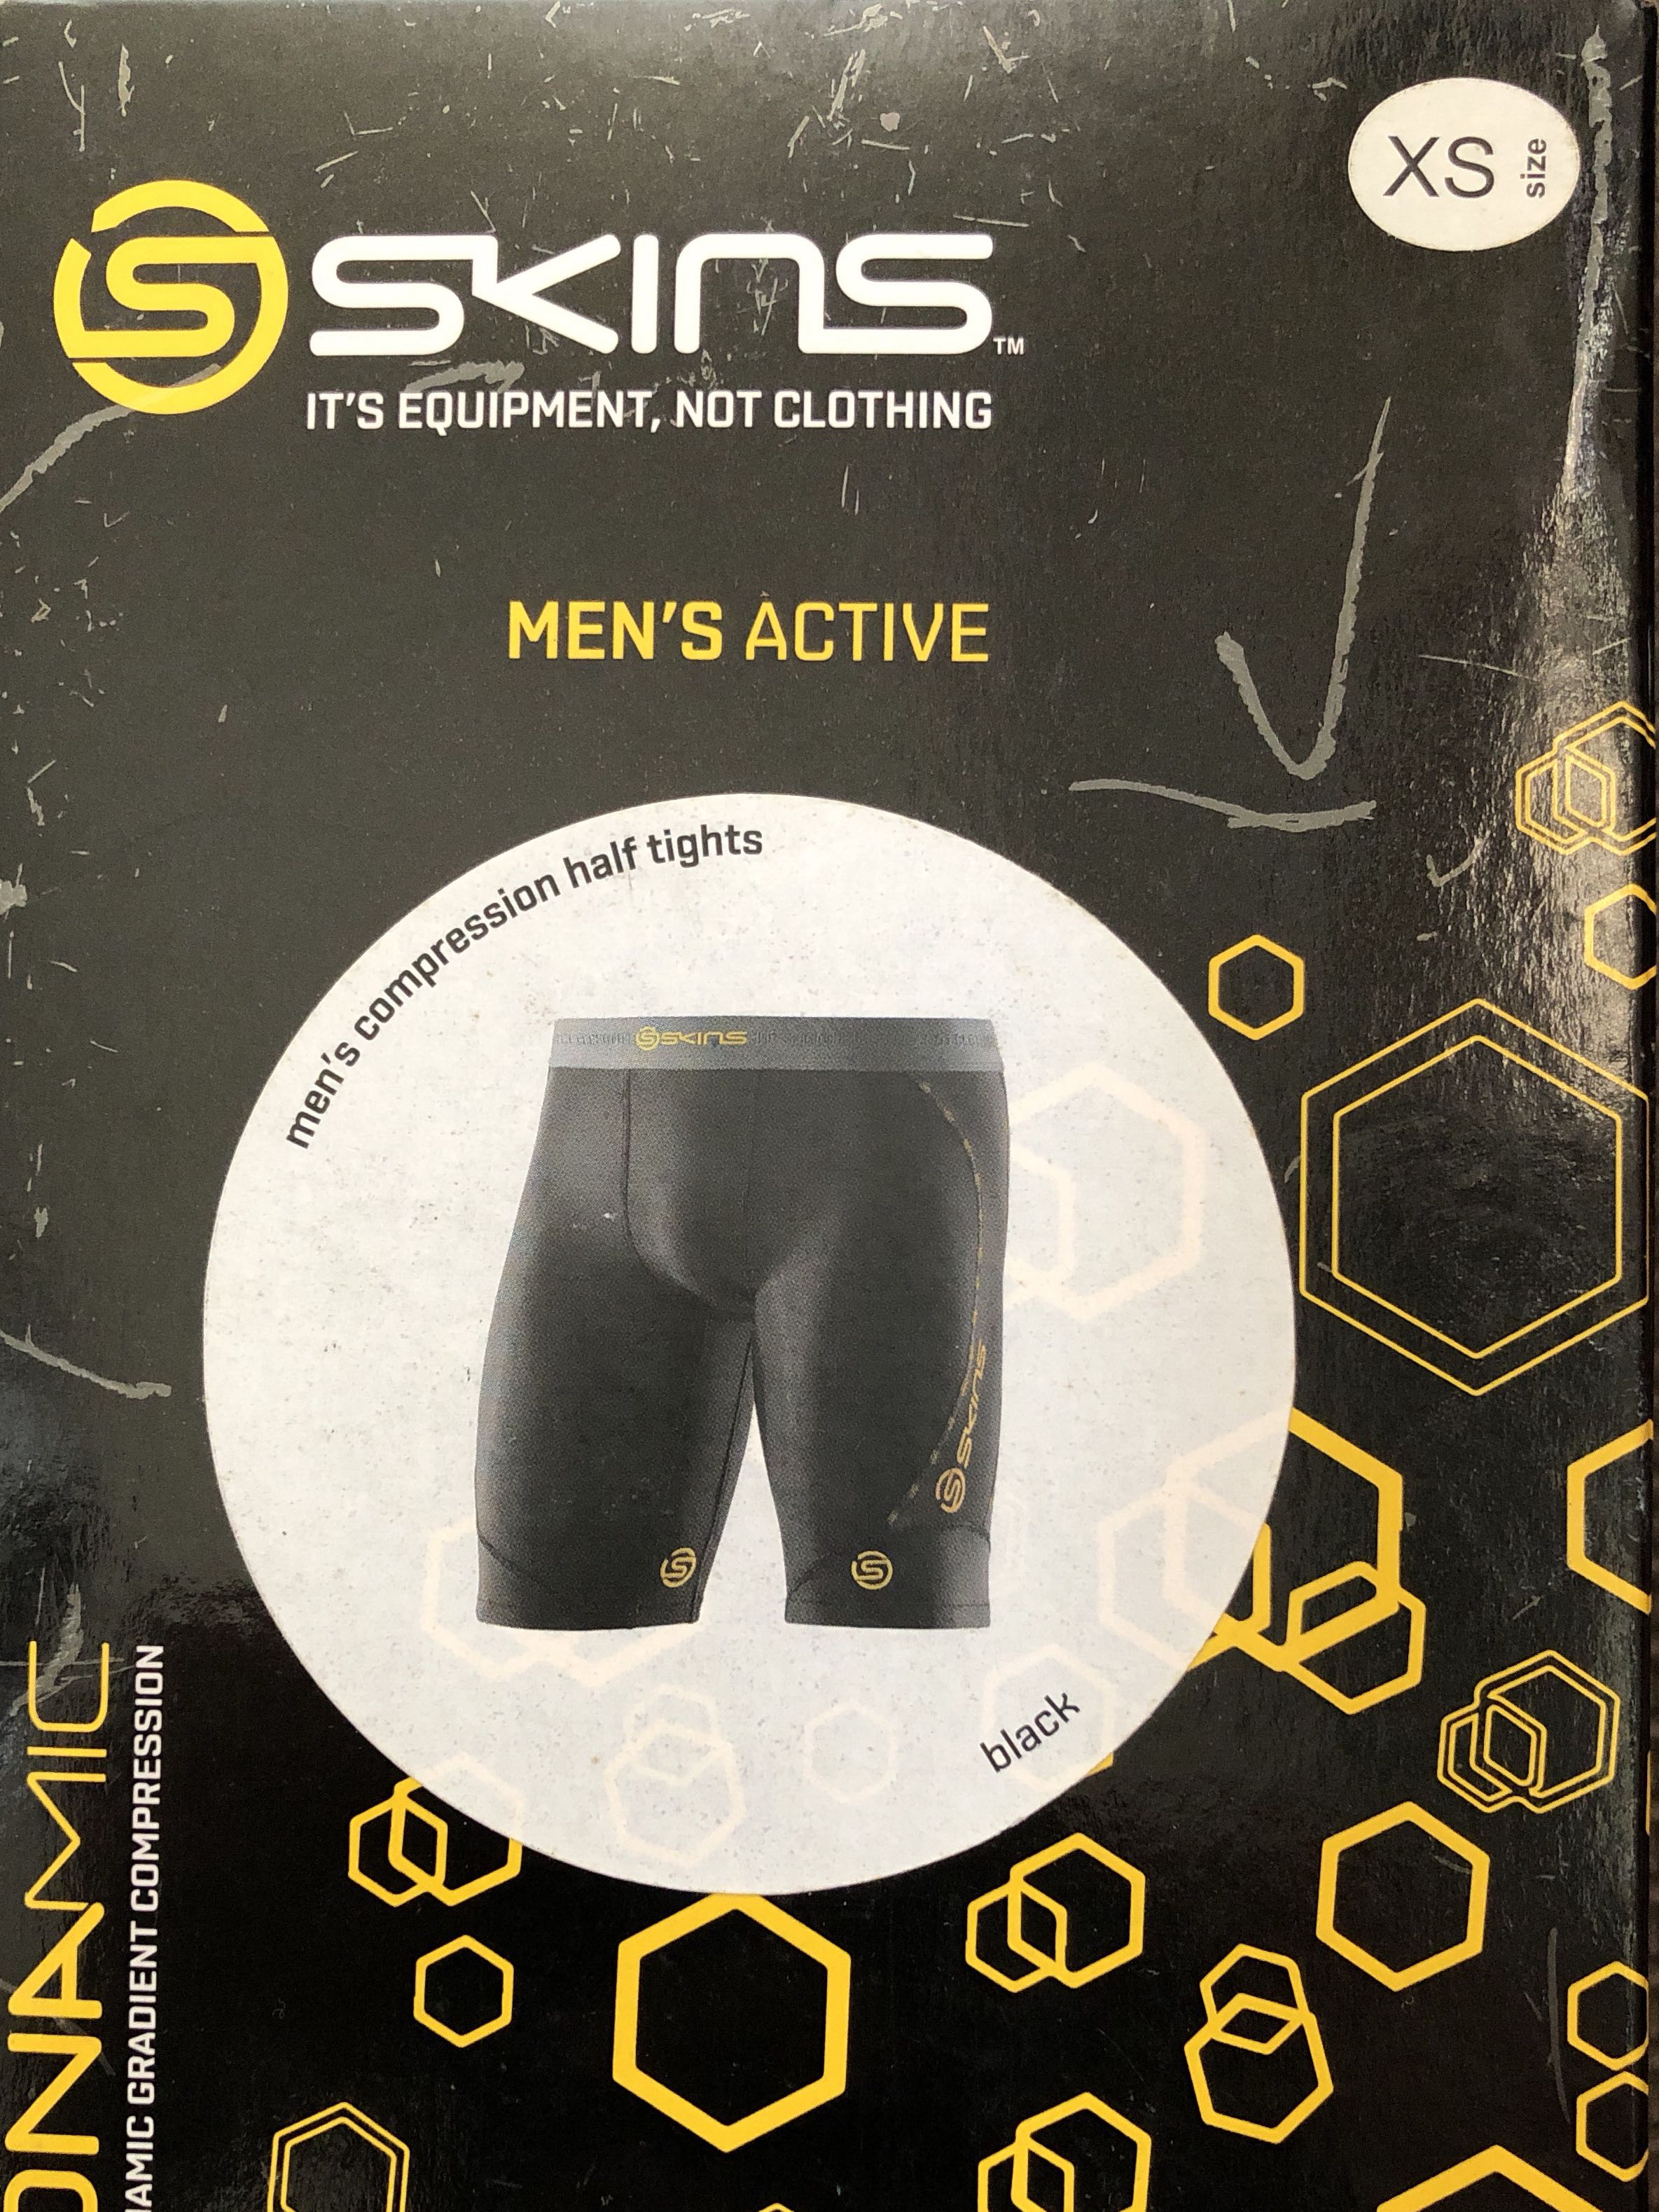 https://media.karousell.com/media/photos/products/2019/03/25/skins_dnamic_mens_compression_half_tights_xs_1553493276_1d46055c.jpg